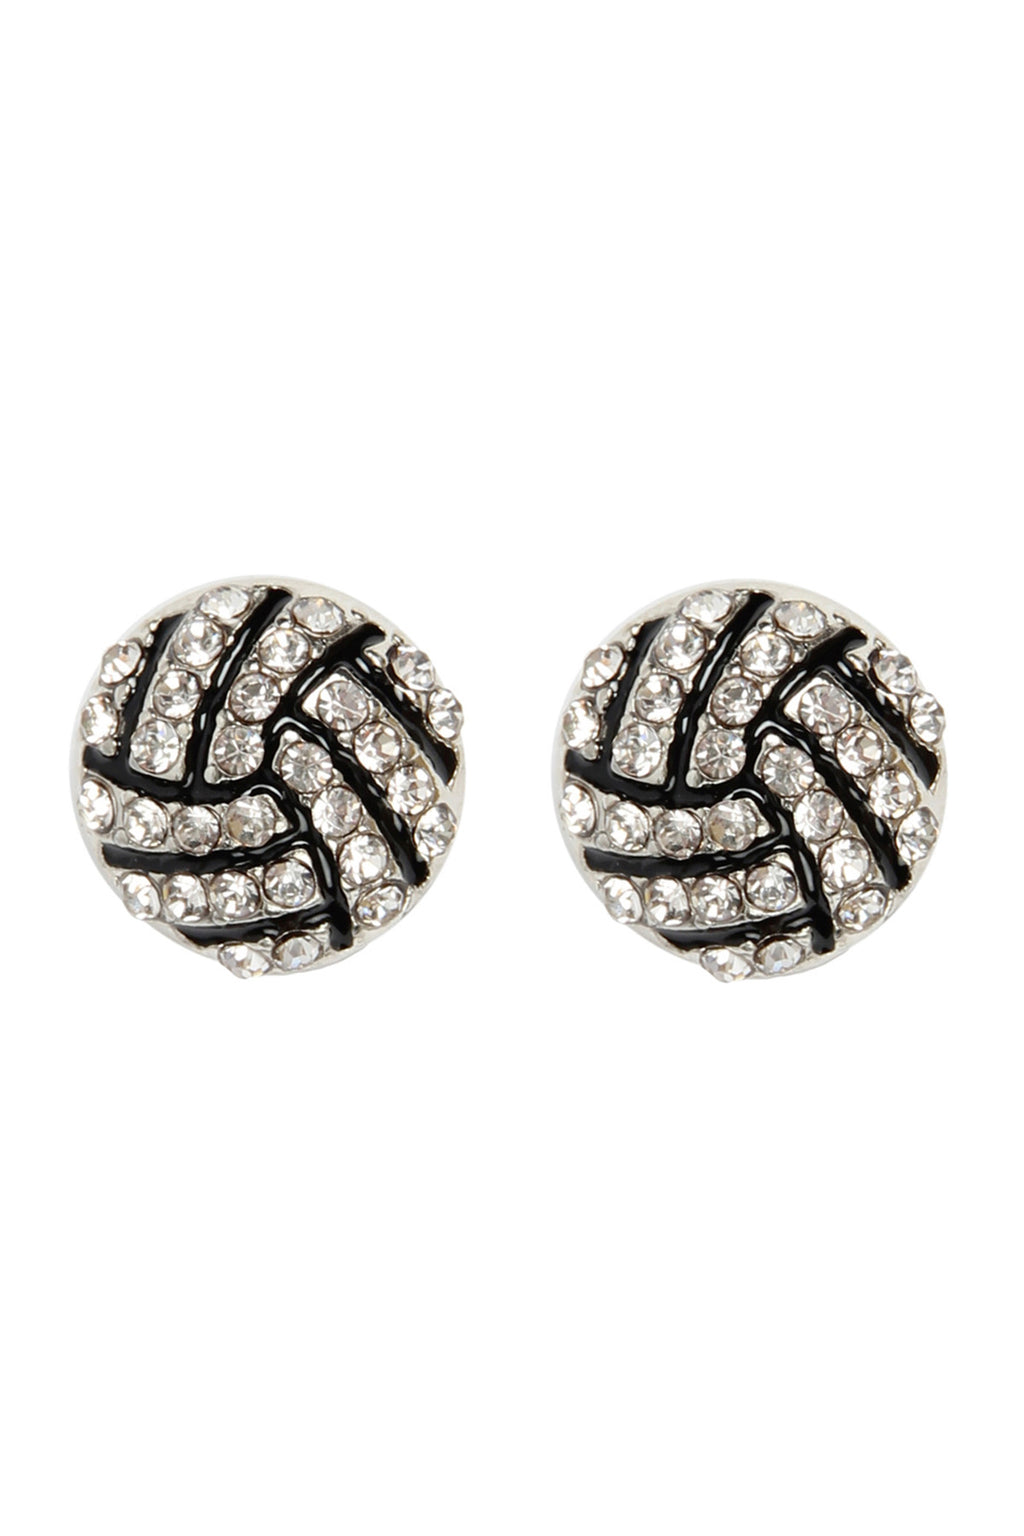 Volleyball Rhinestone Post Earrings Silver - Pack of 6